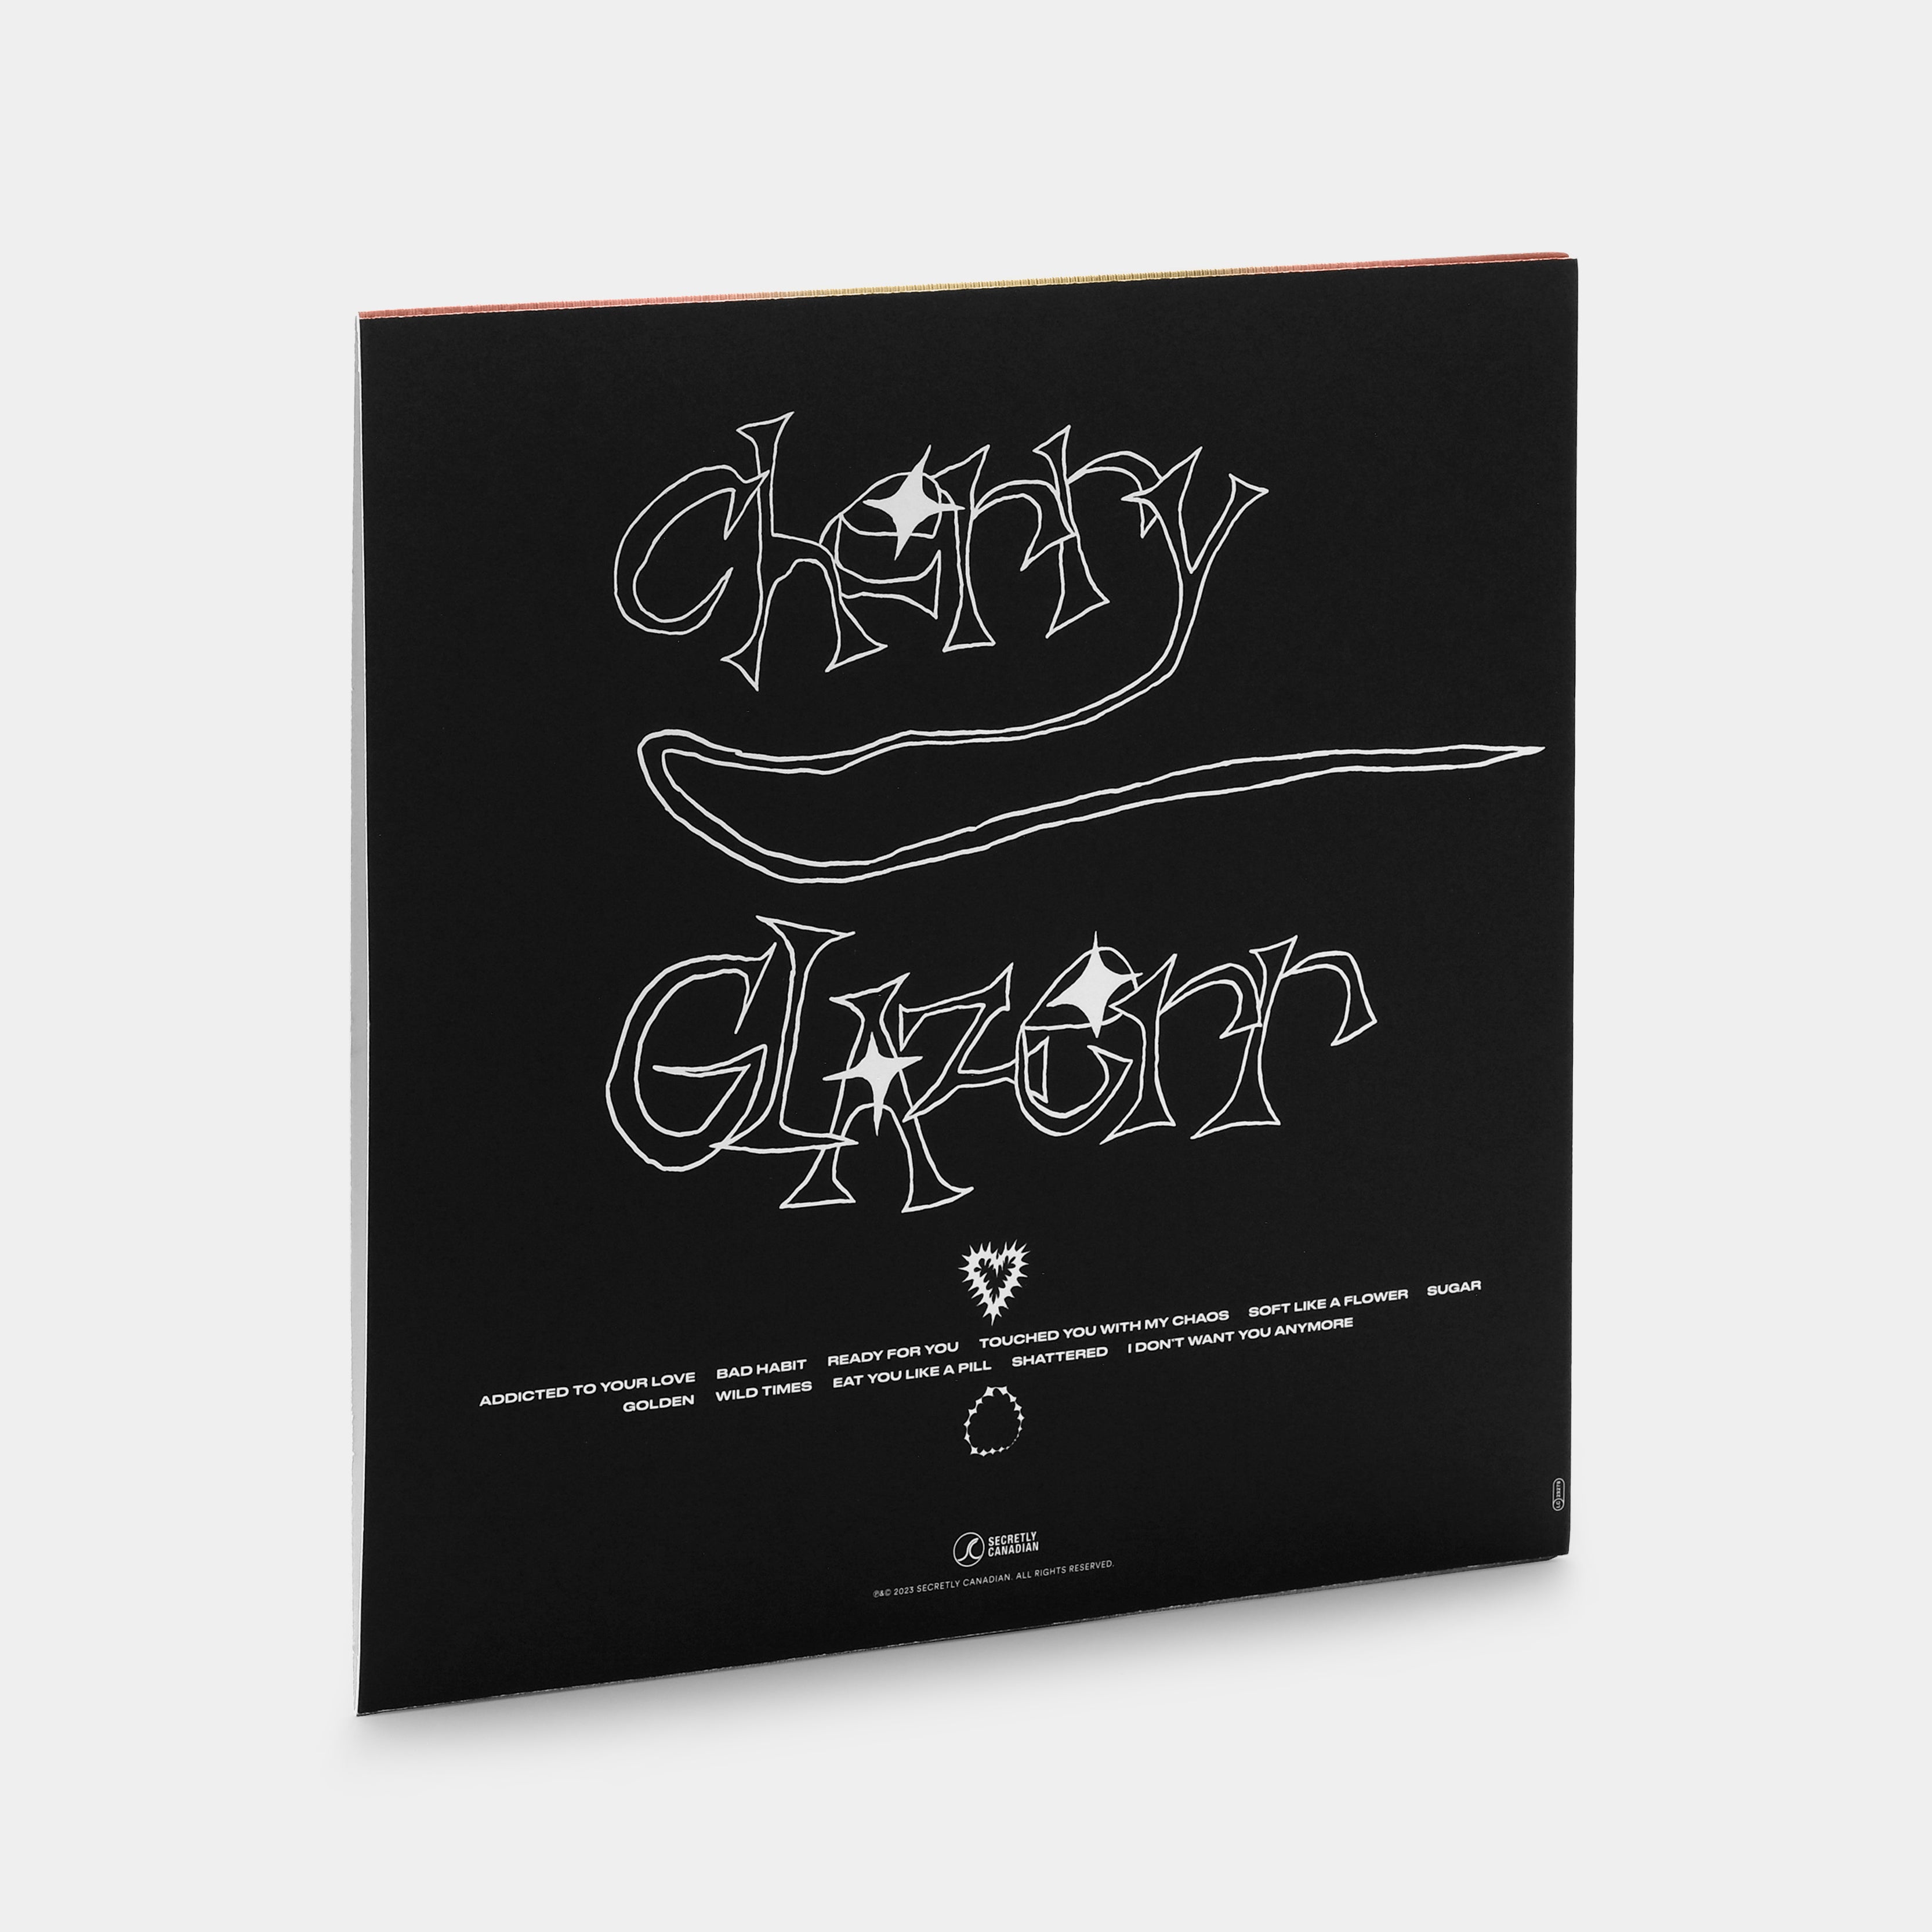 Cherry Glazerr - I Don't Want You Anymore LP Crystal Clear Vinyl Record